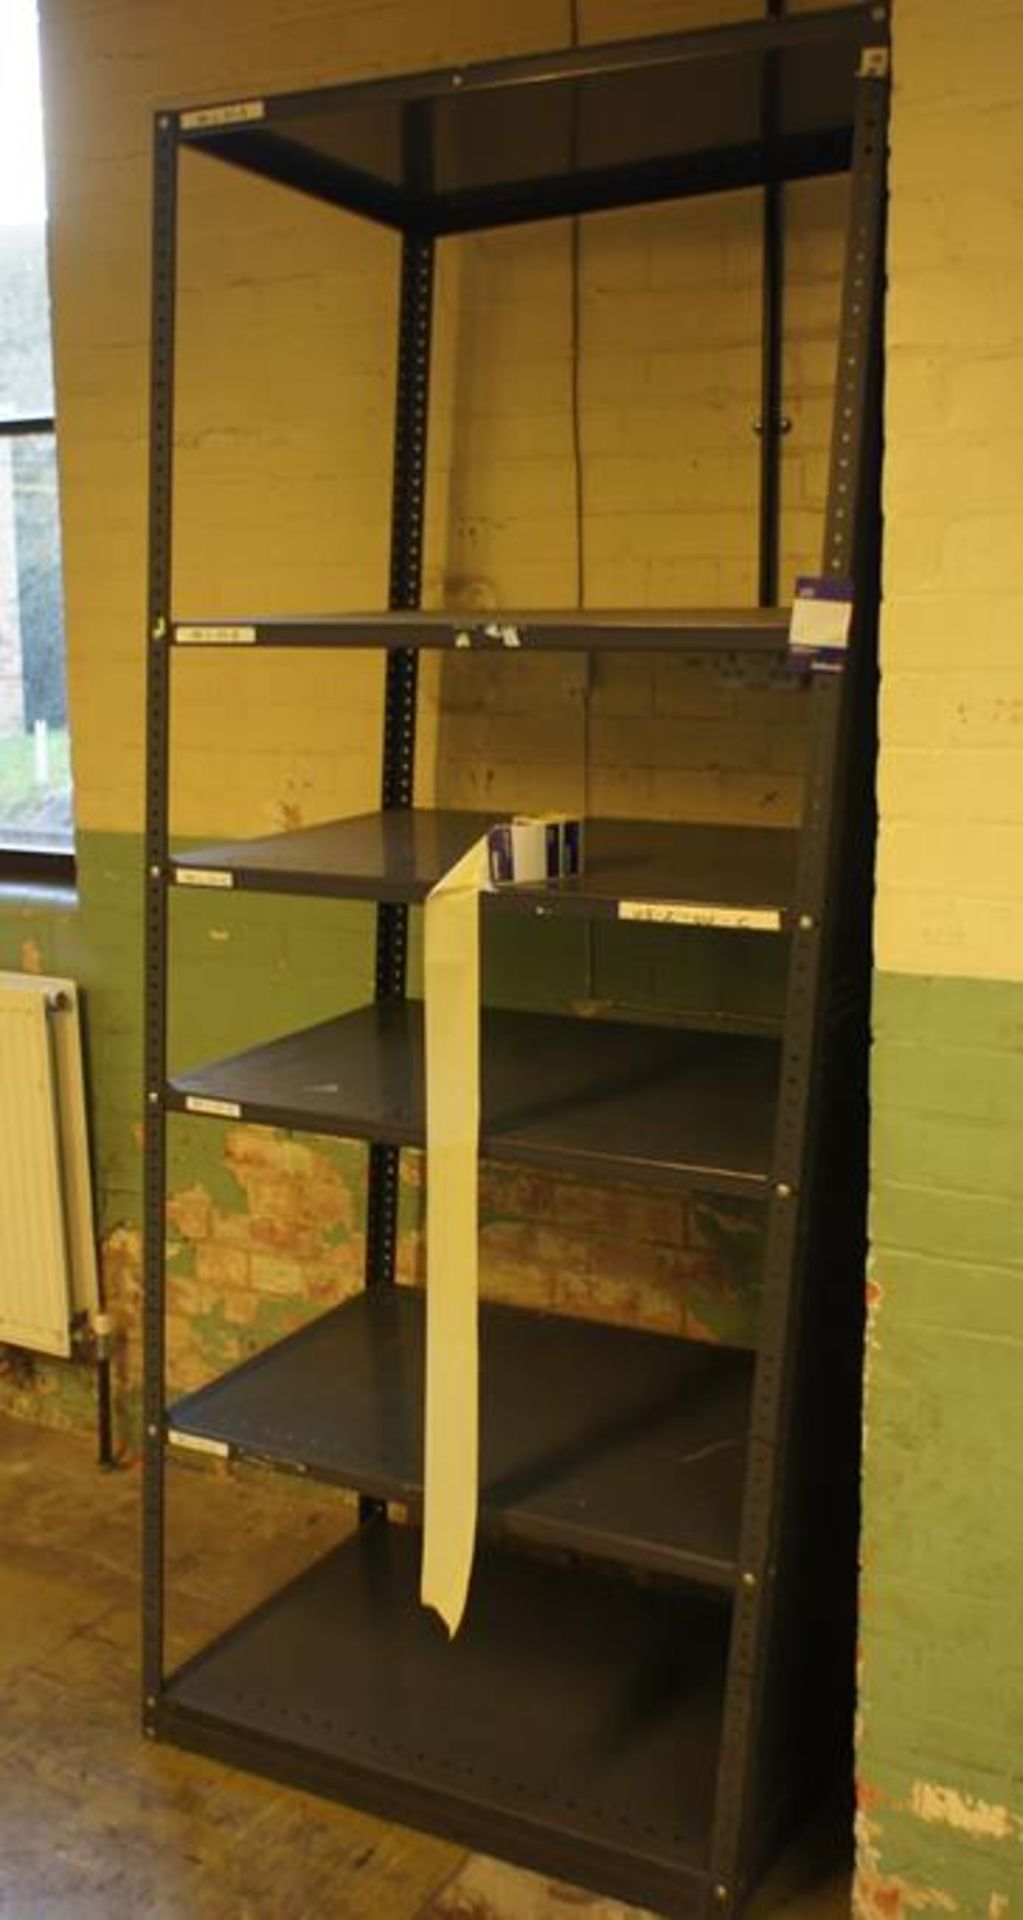 * 33 Bays Link 51 Bolted Shelving Photographs are provided for example purposes only and do not - Image 19 of 24